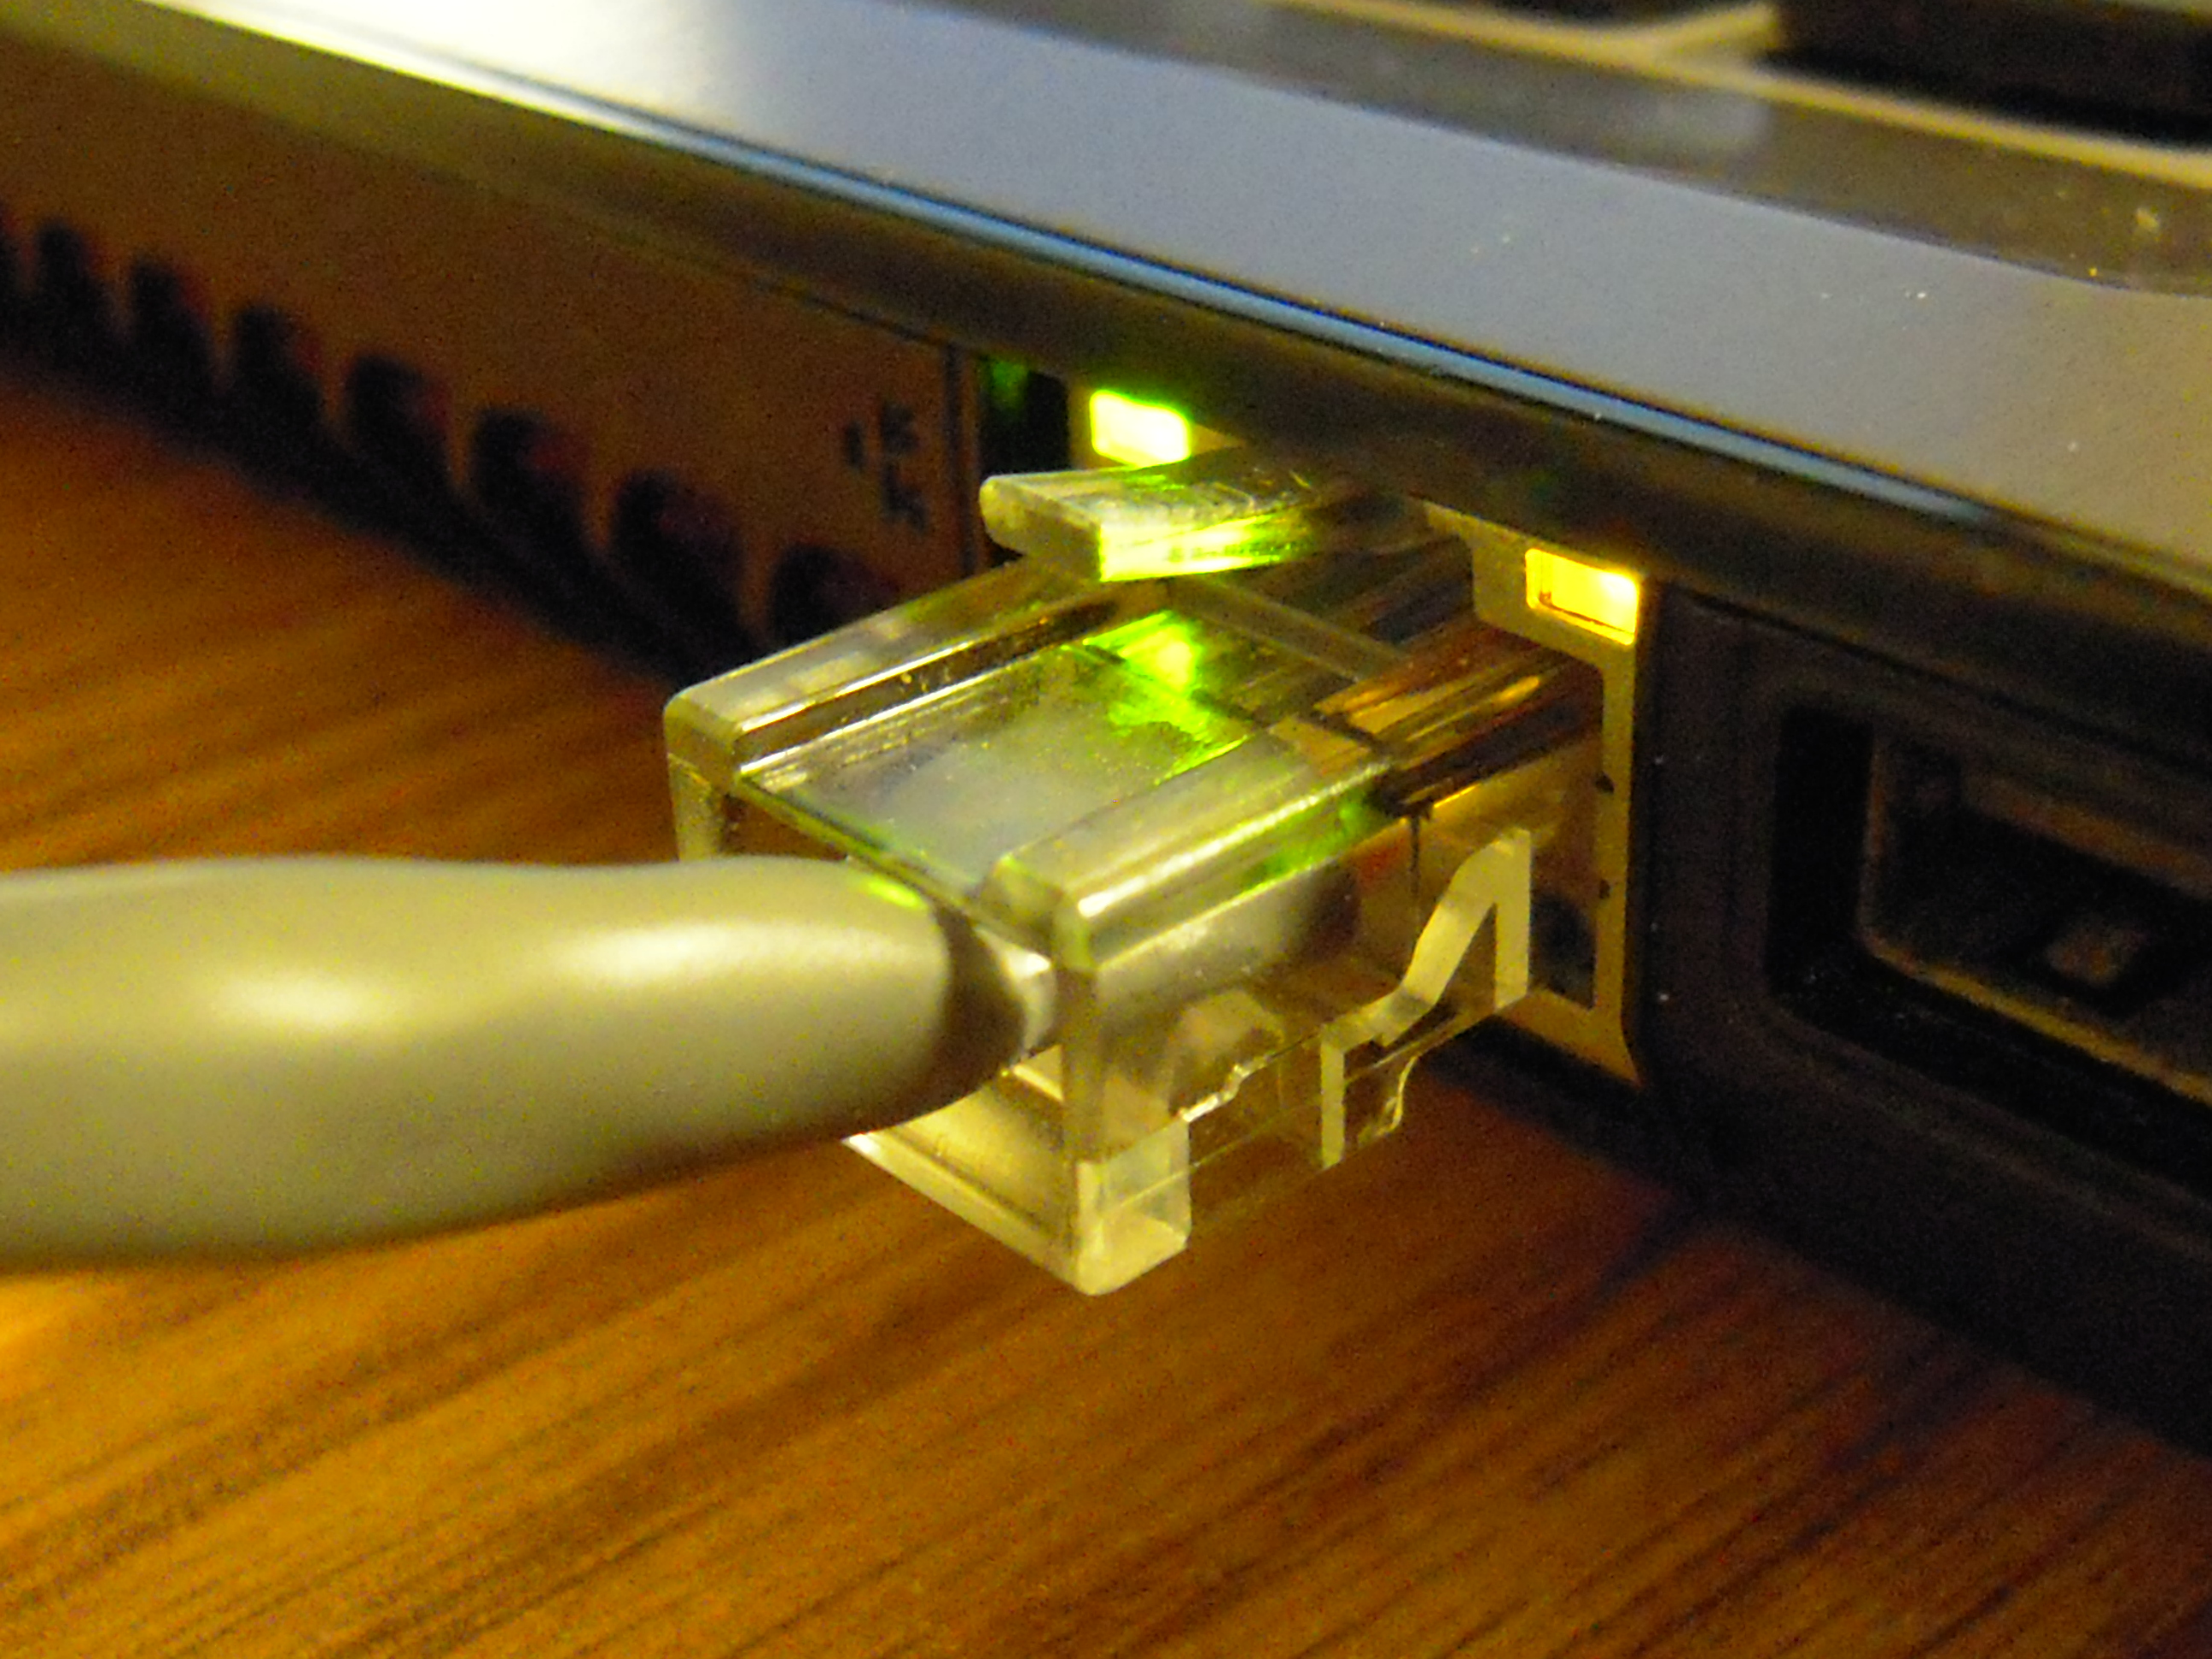 Network cables connected to a computer